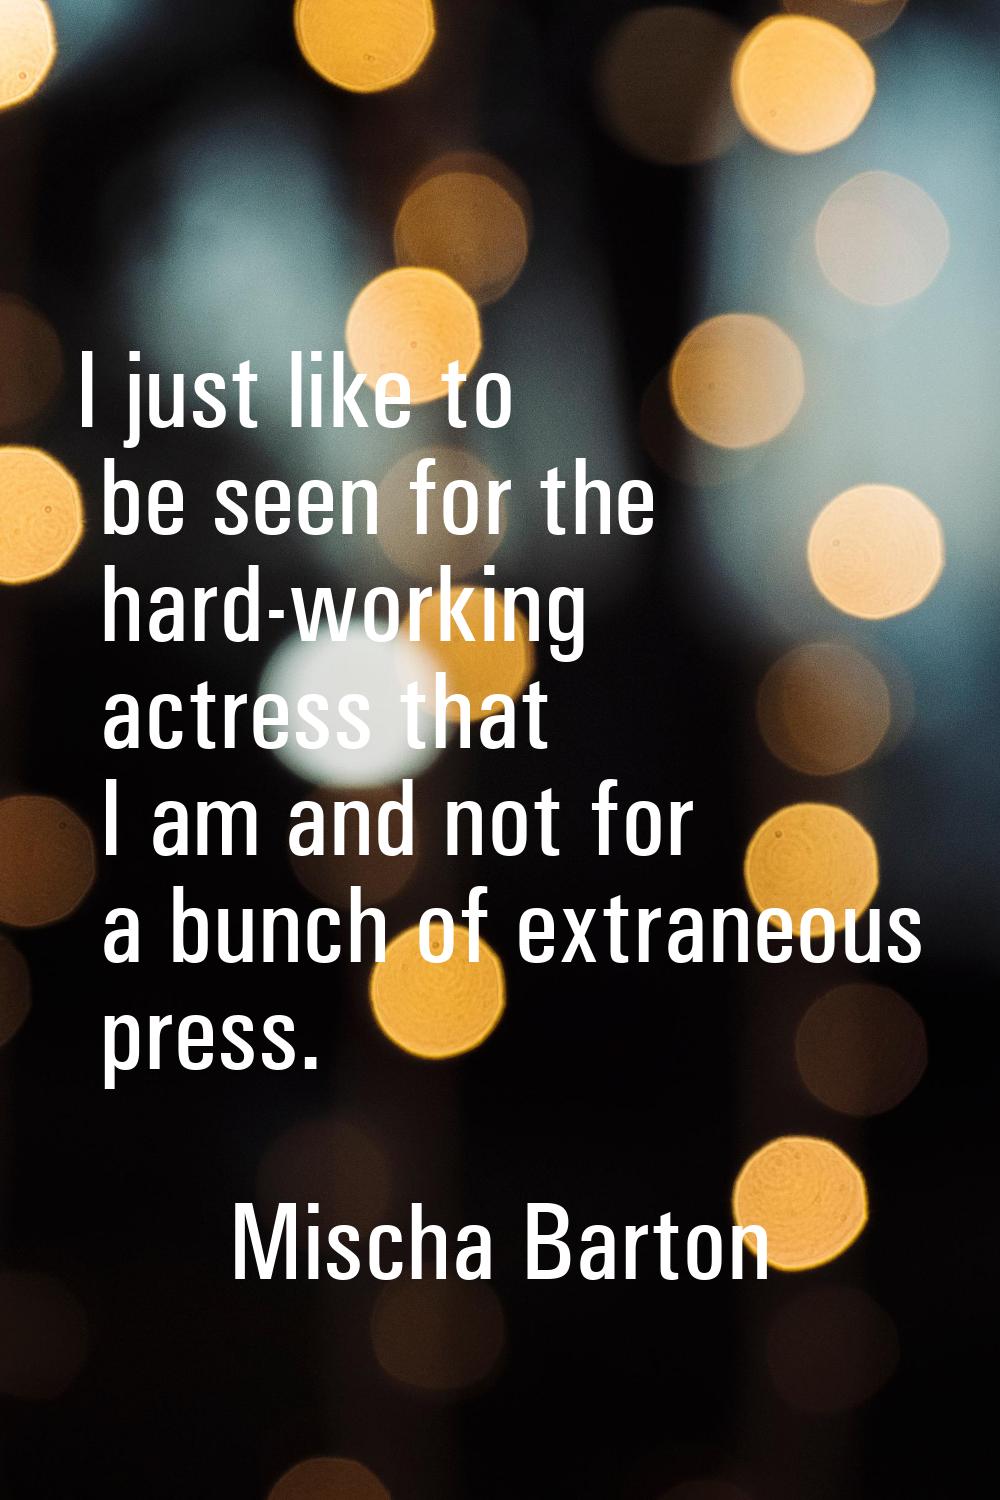 I just like to be seen for the hard-working actress that I am and not for a bunch of extraneous pre